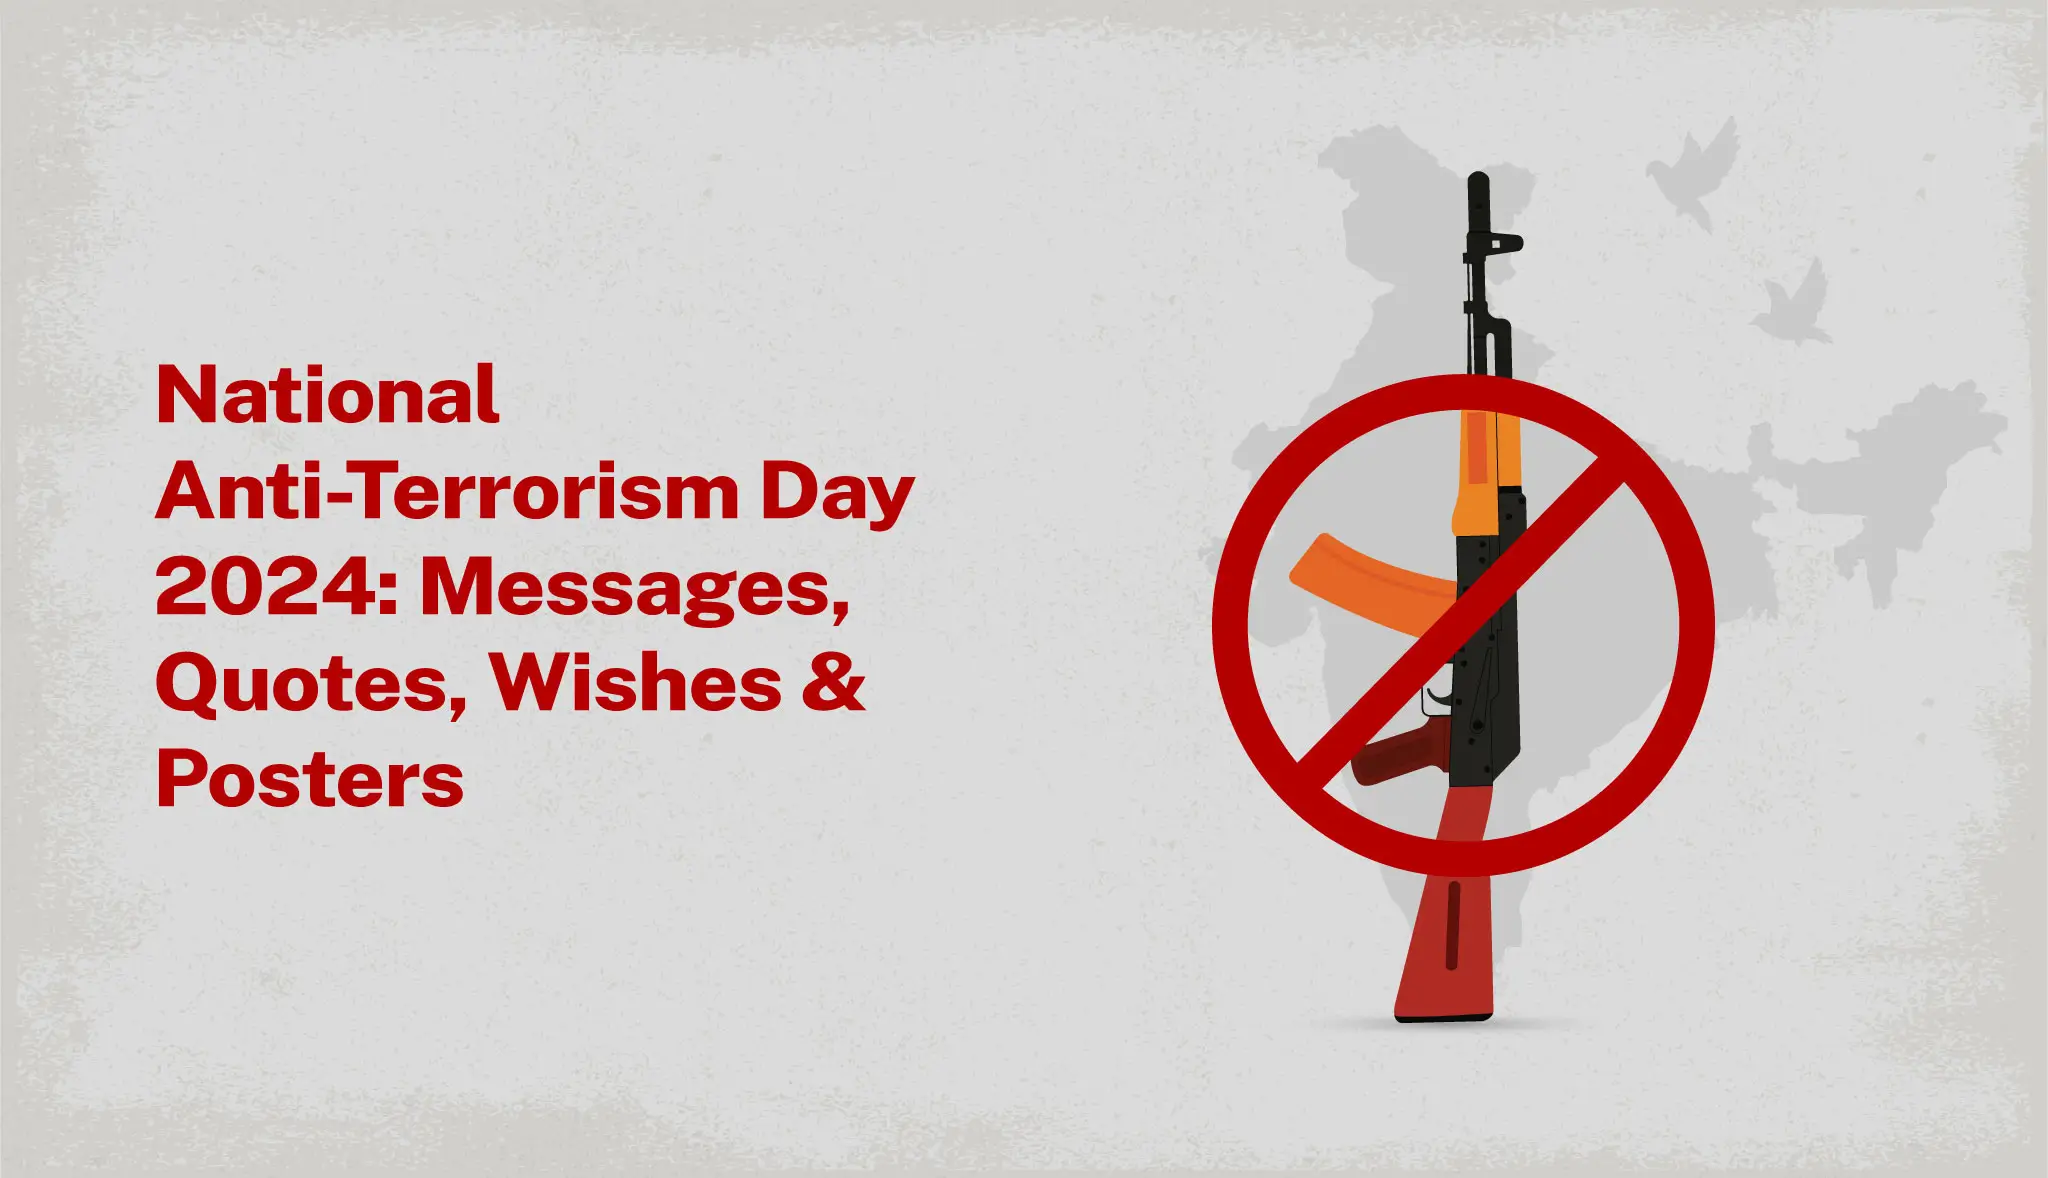 National Anti-Terrorism Day 2024: Quotes, Wishes & Posters